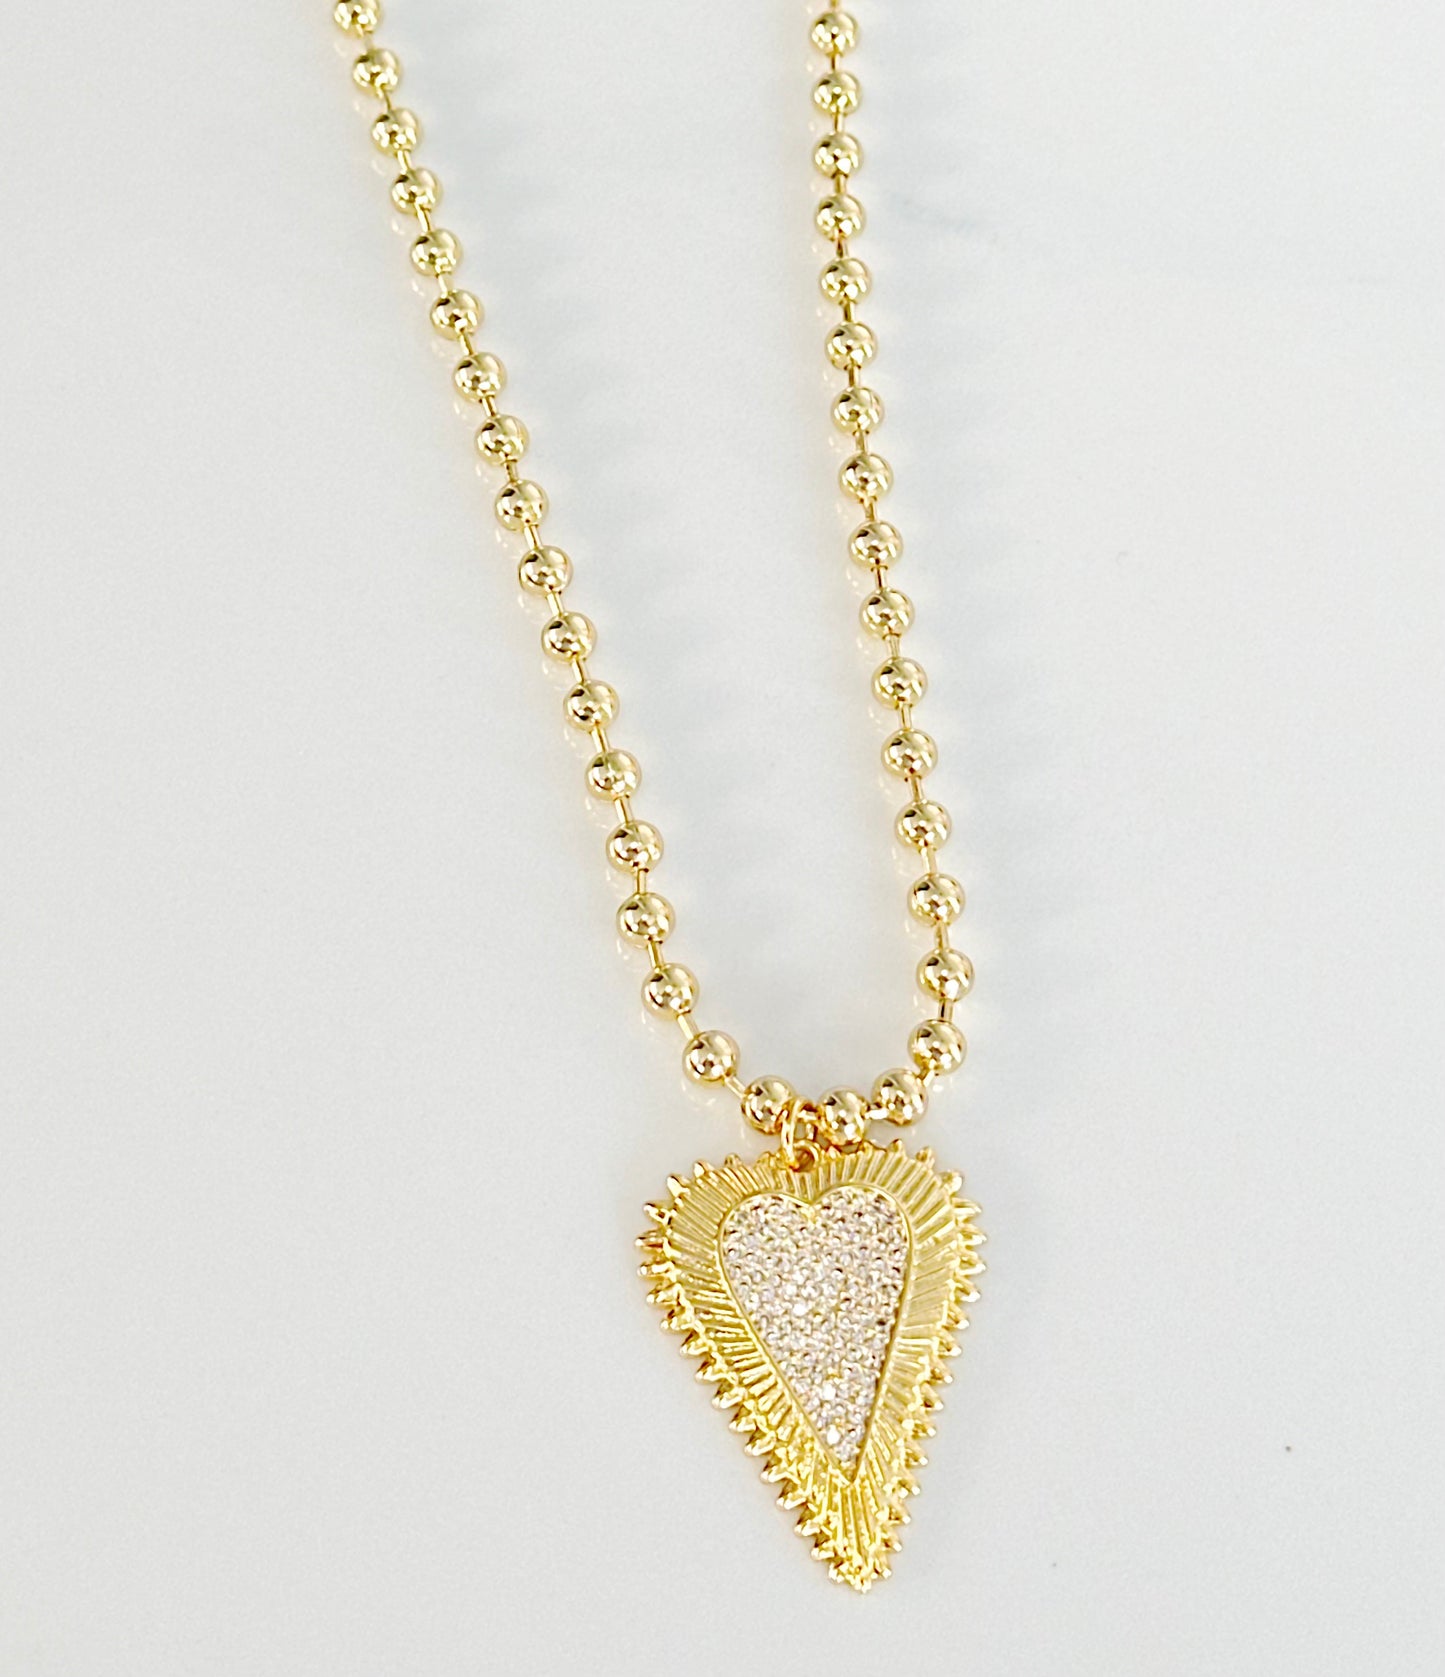 Beaded necklace with St. Benito or Gold Pave Heart - Adorn U